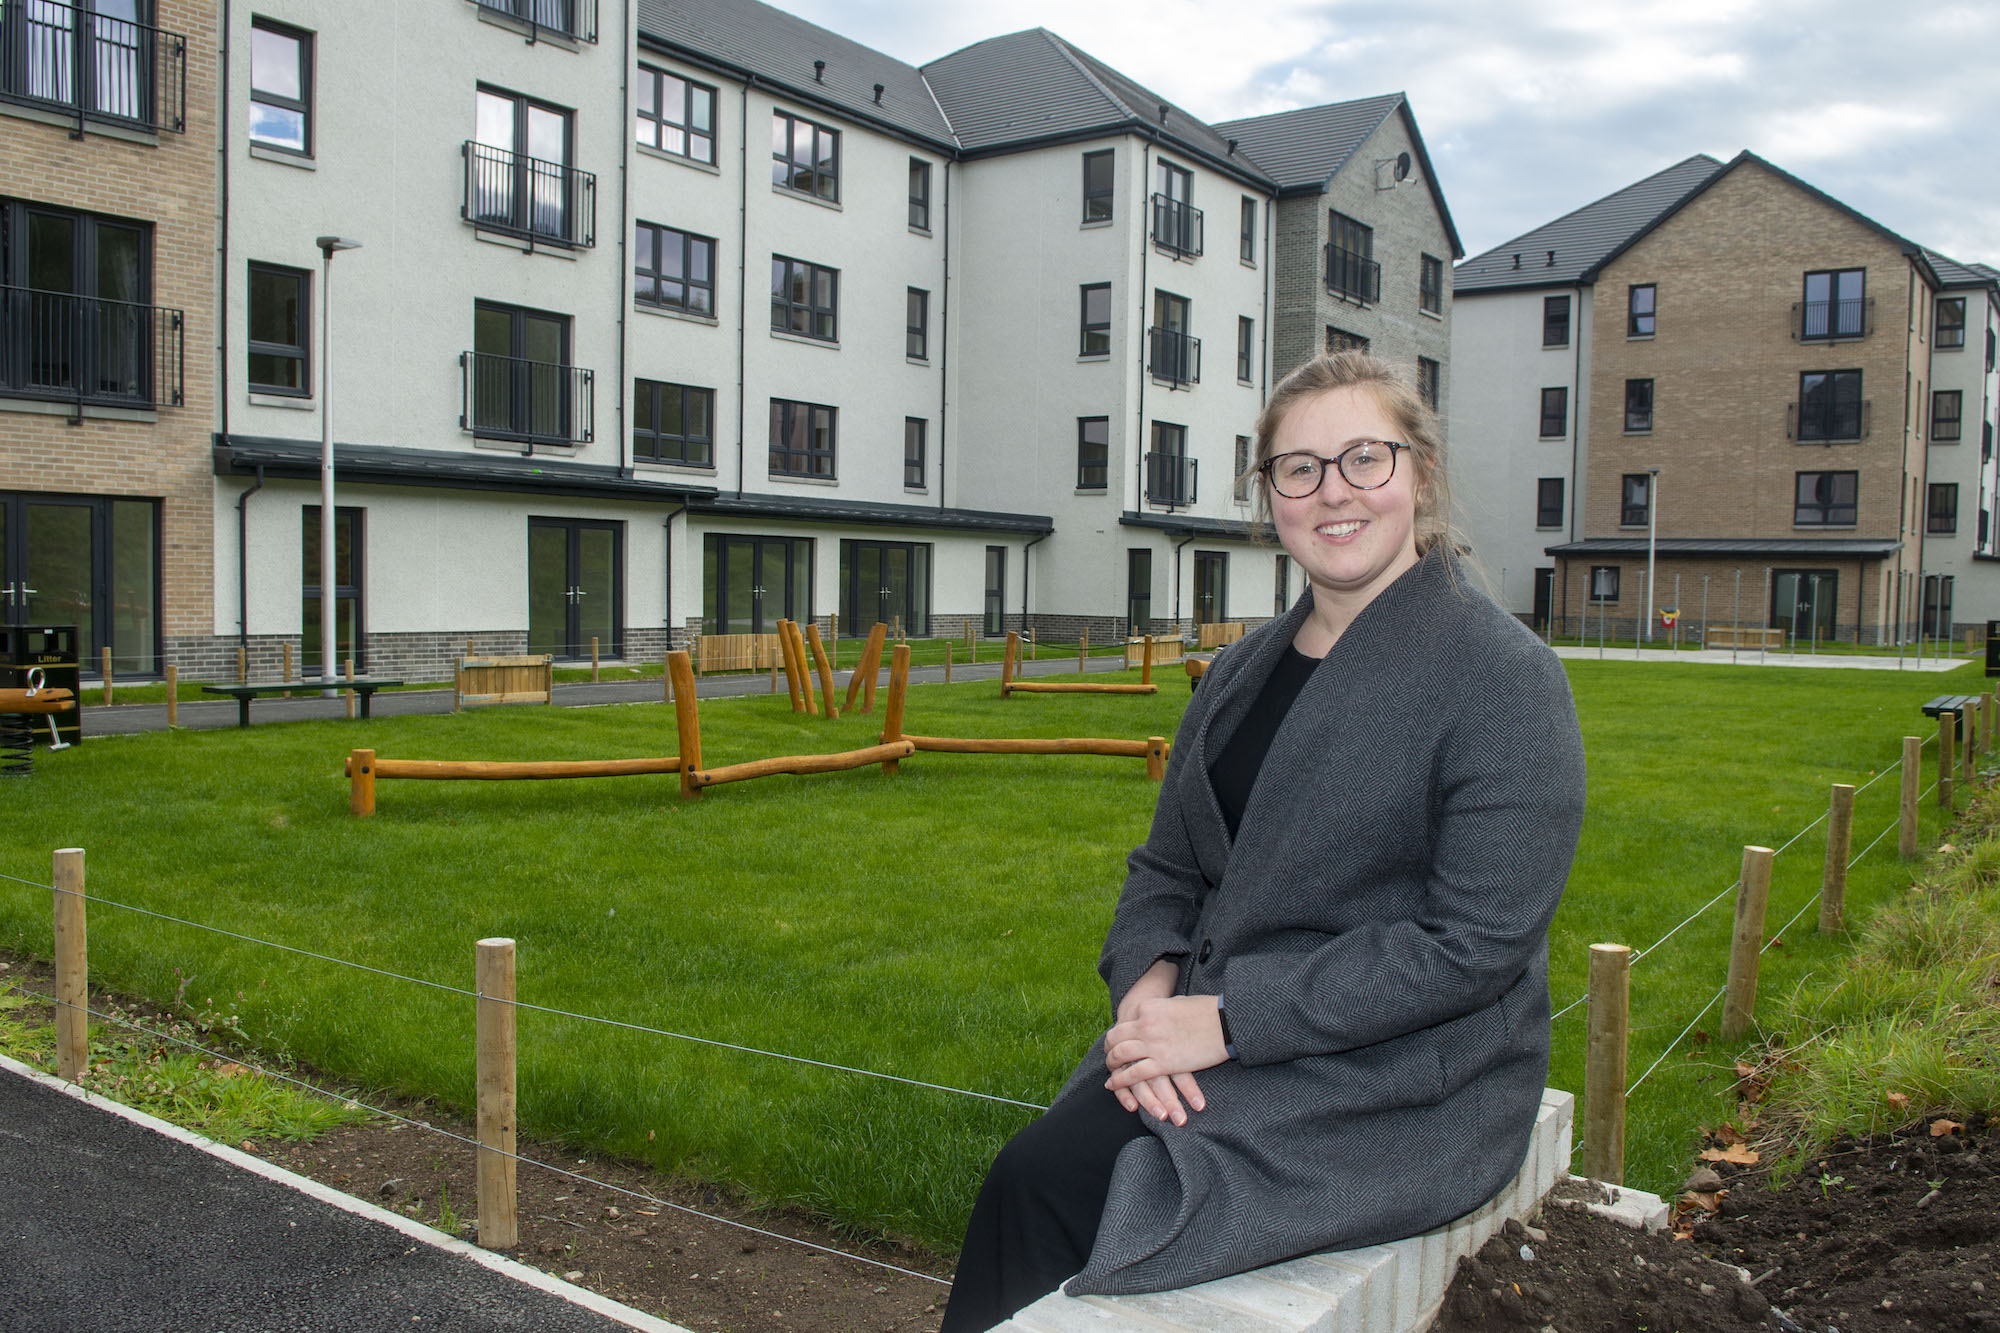 100 new gold standard council houses completed in Aberdeen